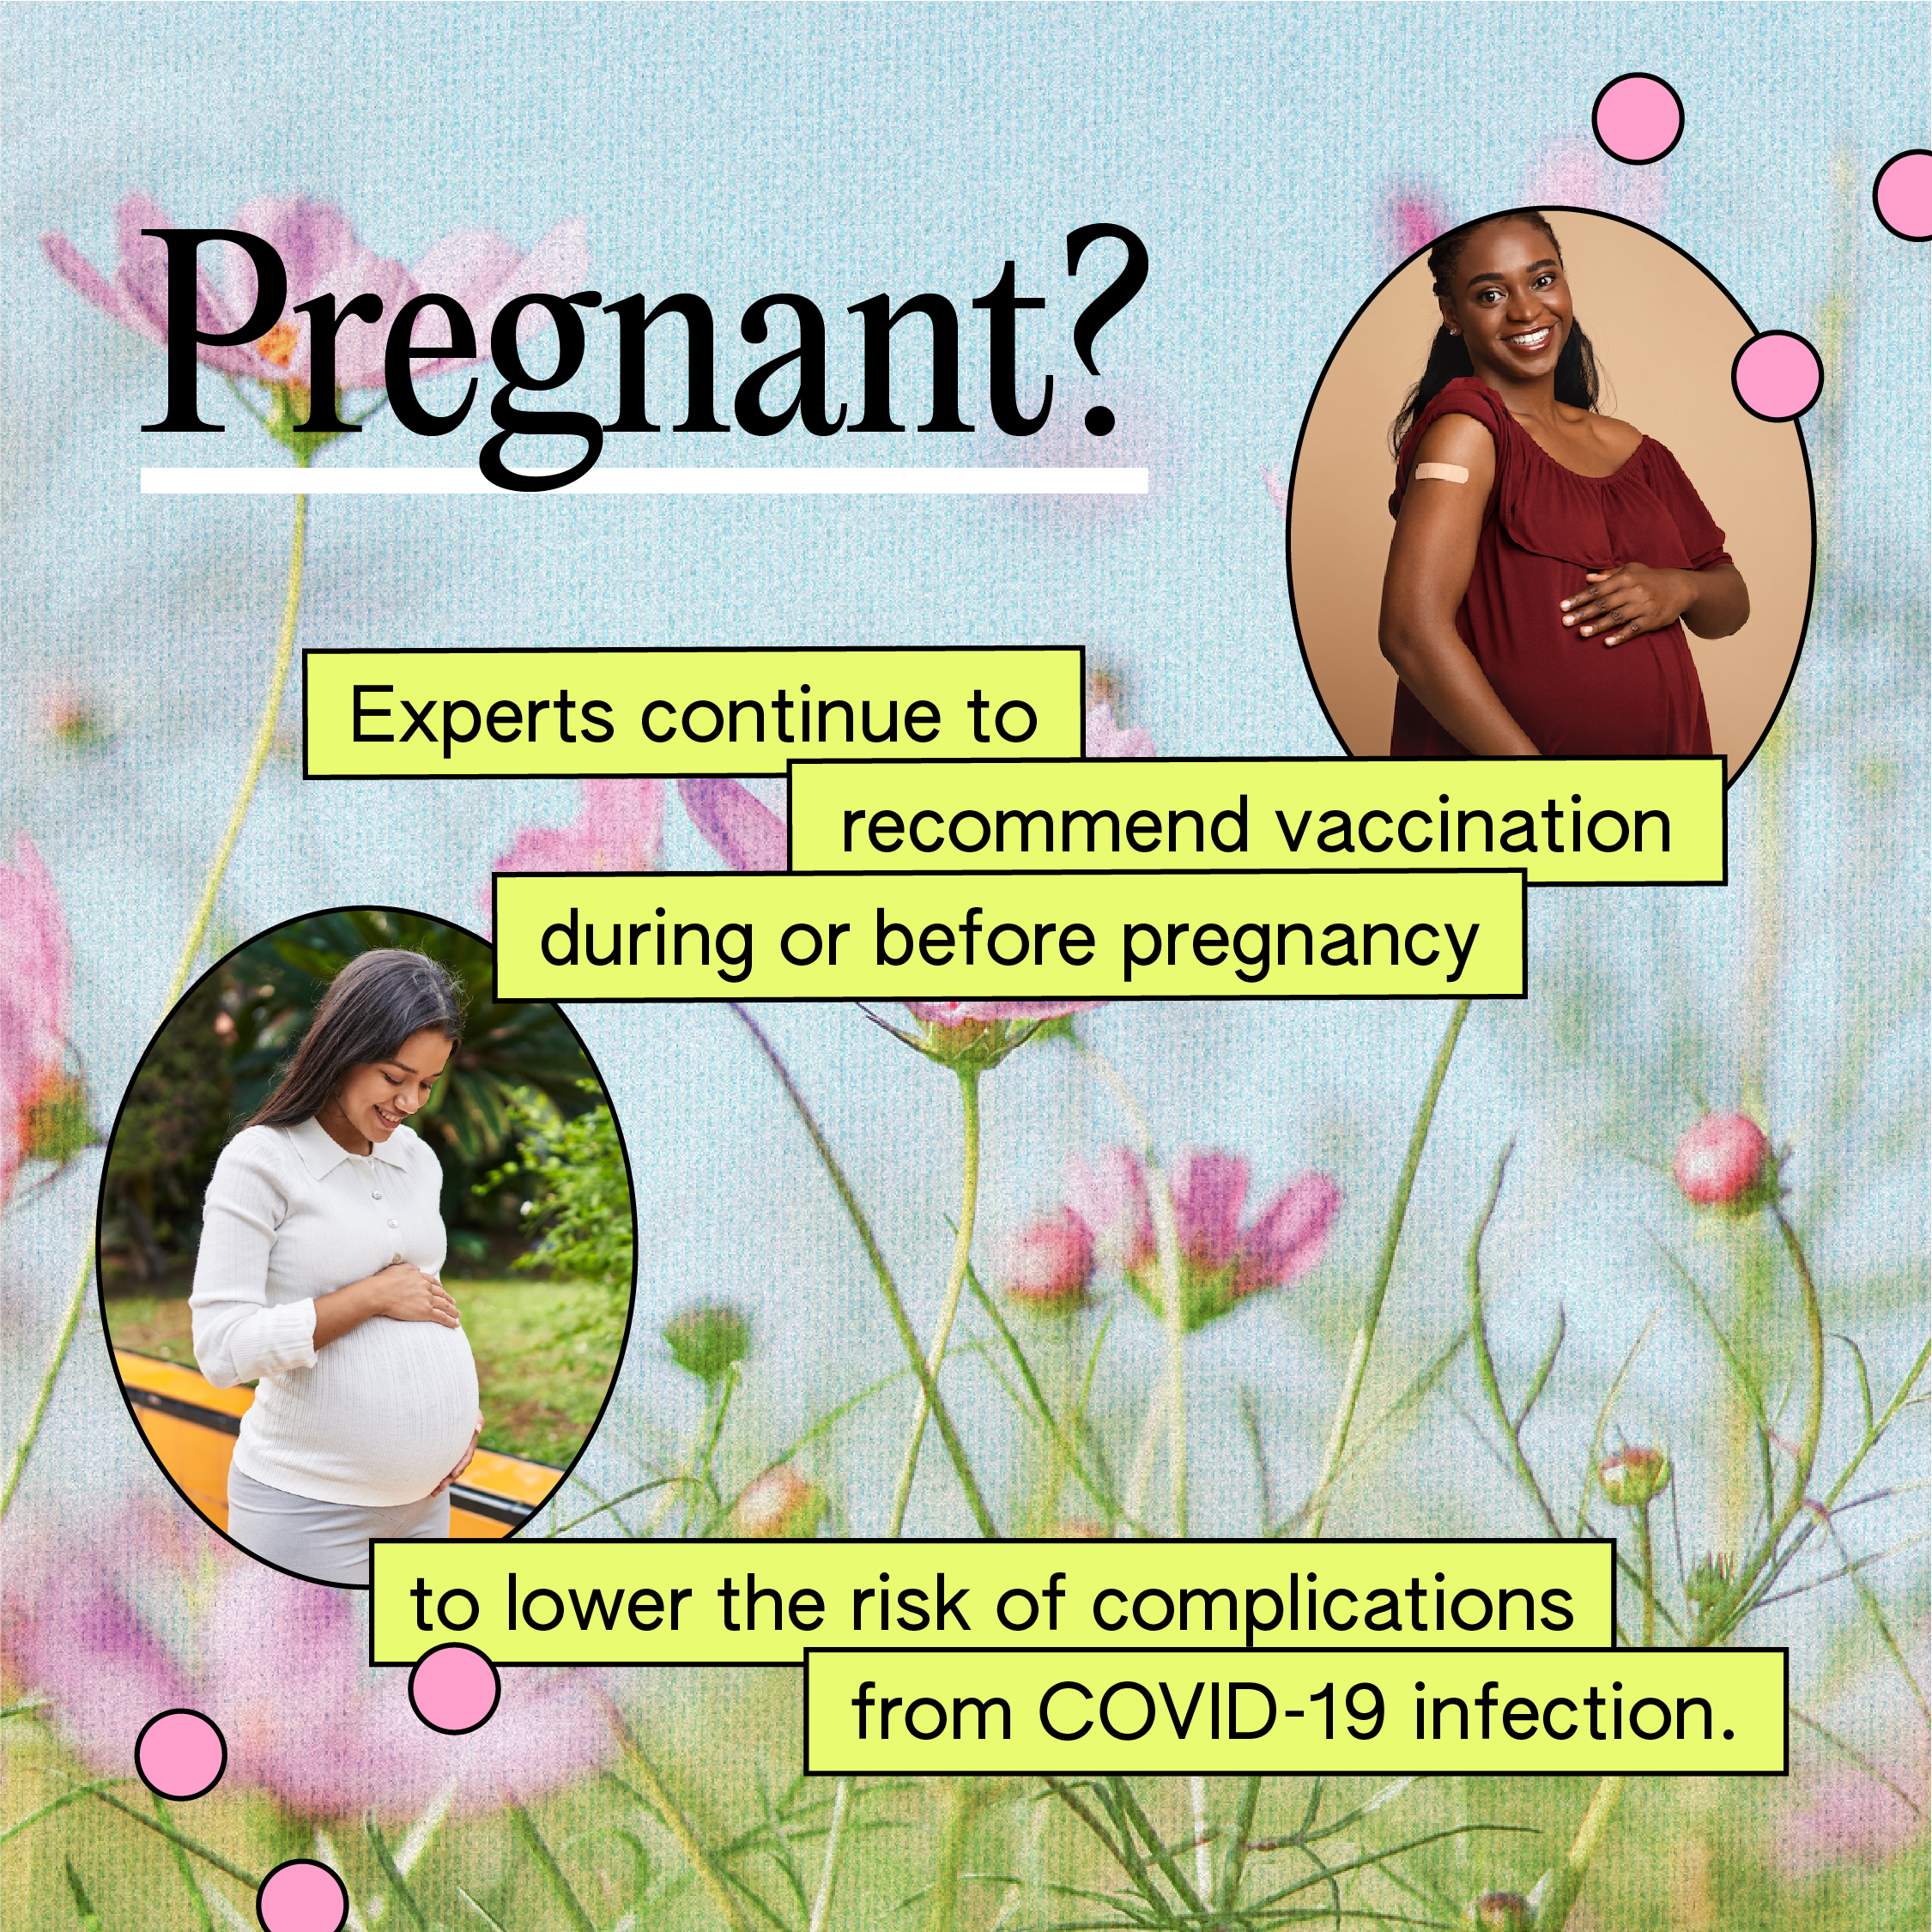 Two images of pregnant women holding their wombs and smiling. One of the images is a Black woman displaying a band-aid on their upper arm. The text reads: "Pregnant? Experts continue to recommend vaccination during or before pregnancy to lower the risk of complications from COVID-19 infection."